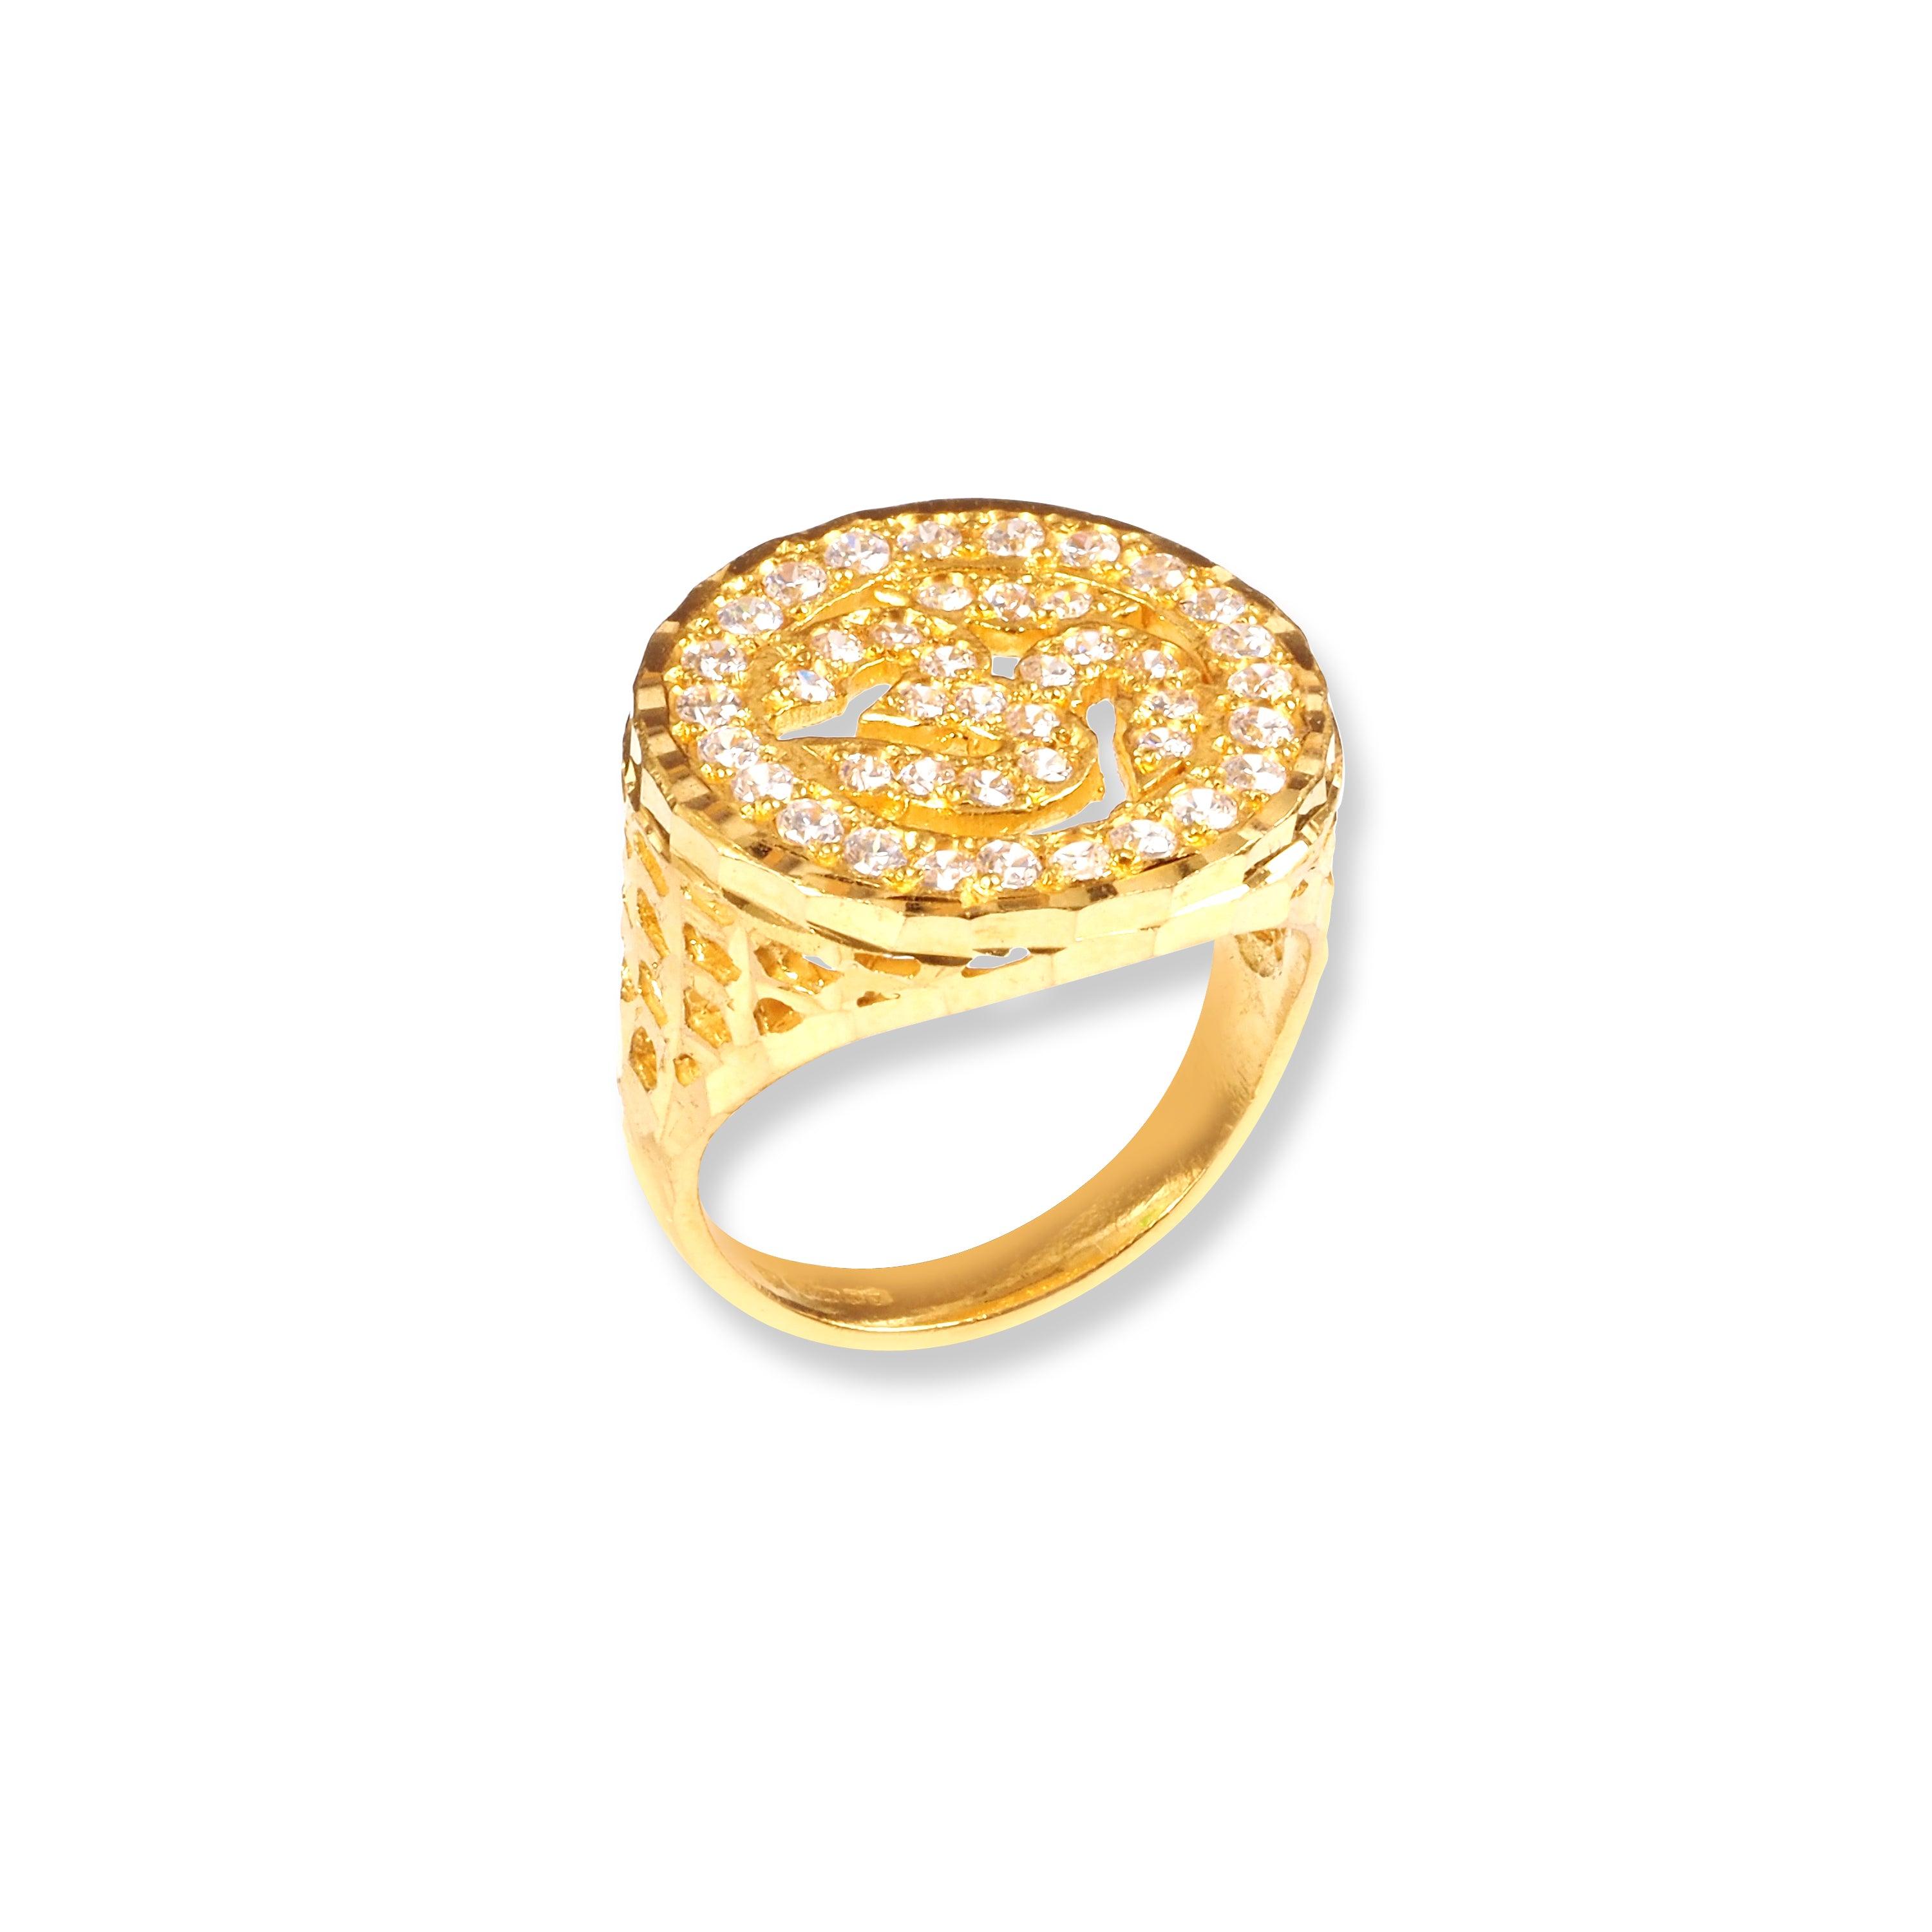 22ct Gold Gents Om Ring with Cubic Zirconia Stones (8.26g) GR-8318 - Minar Jewellers